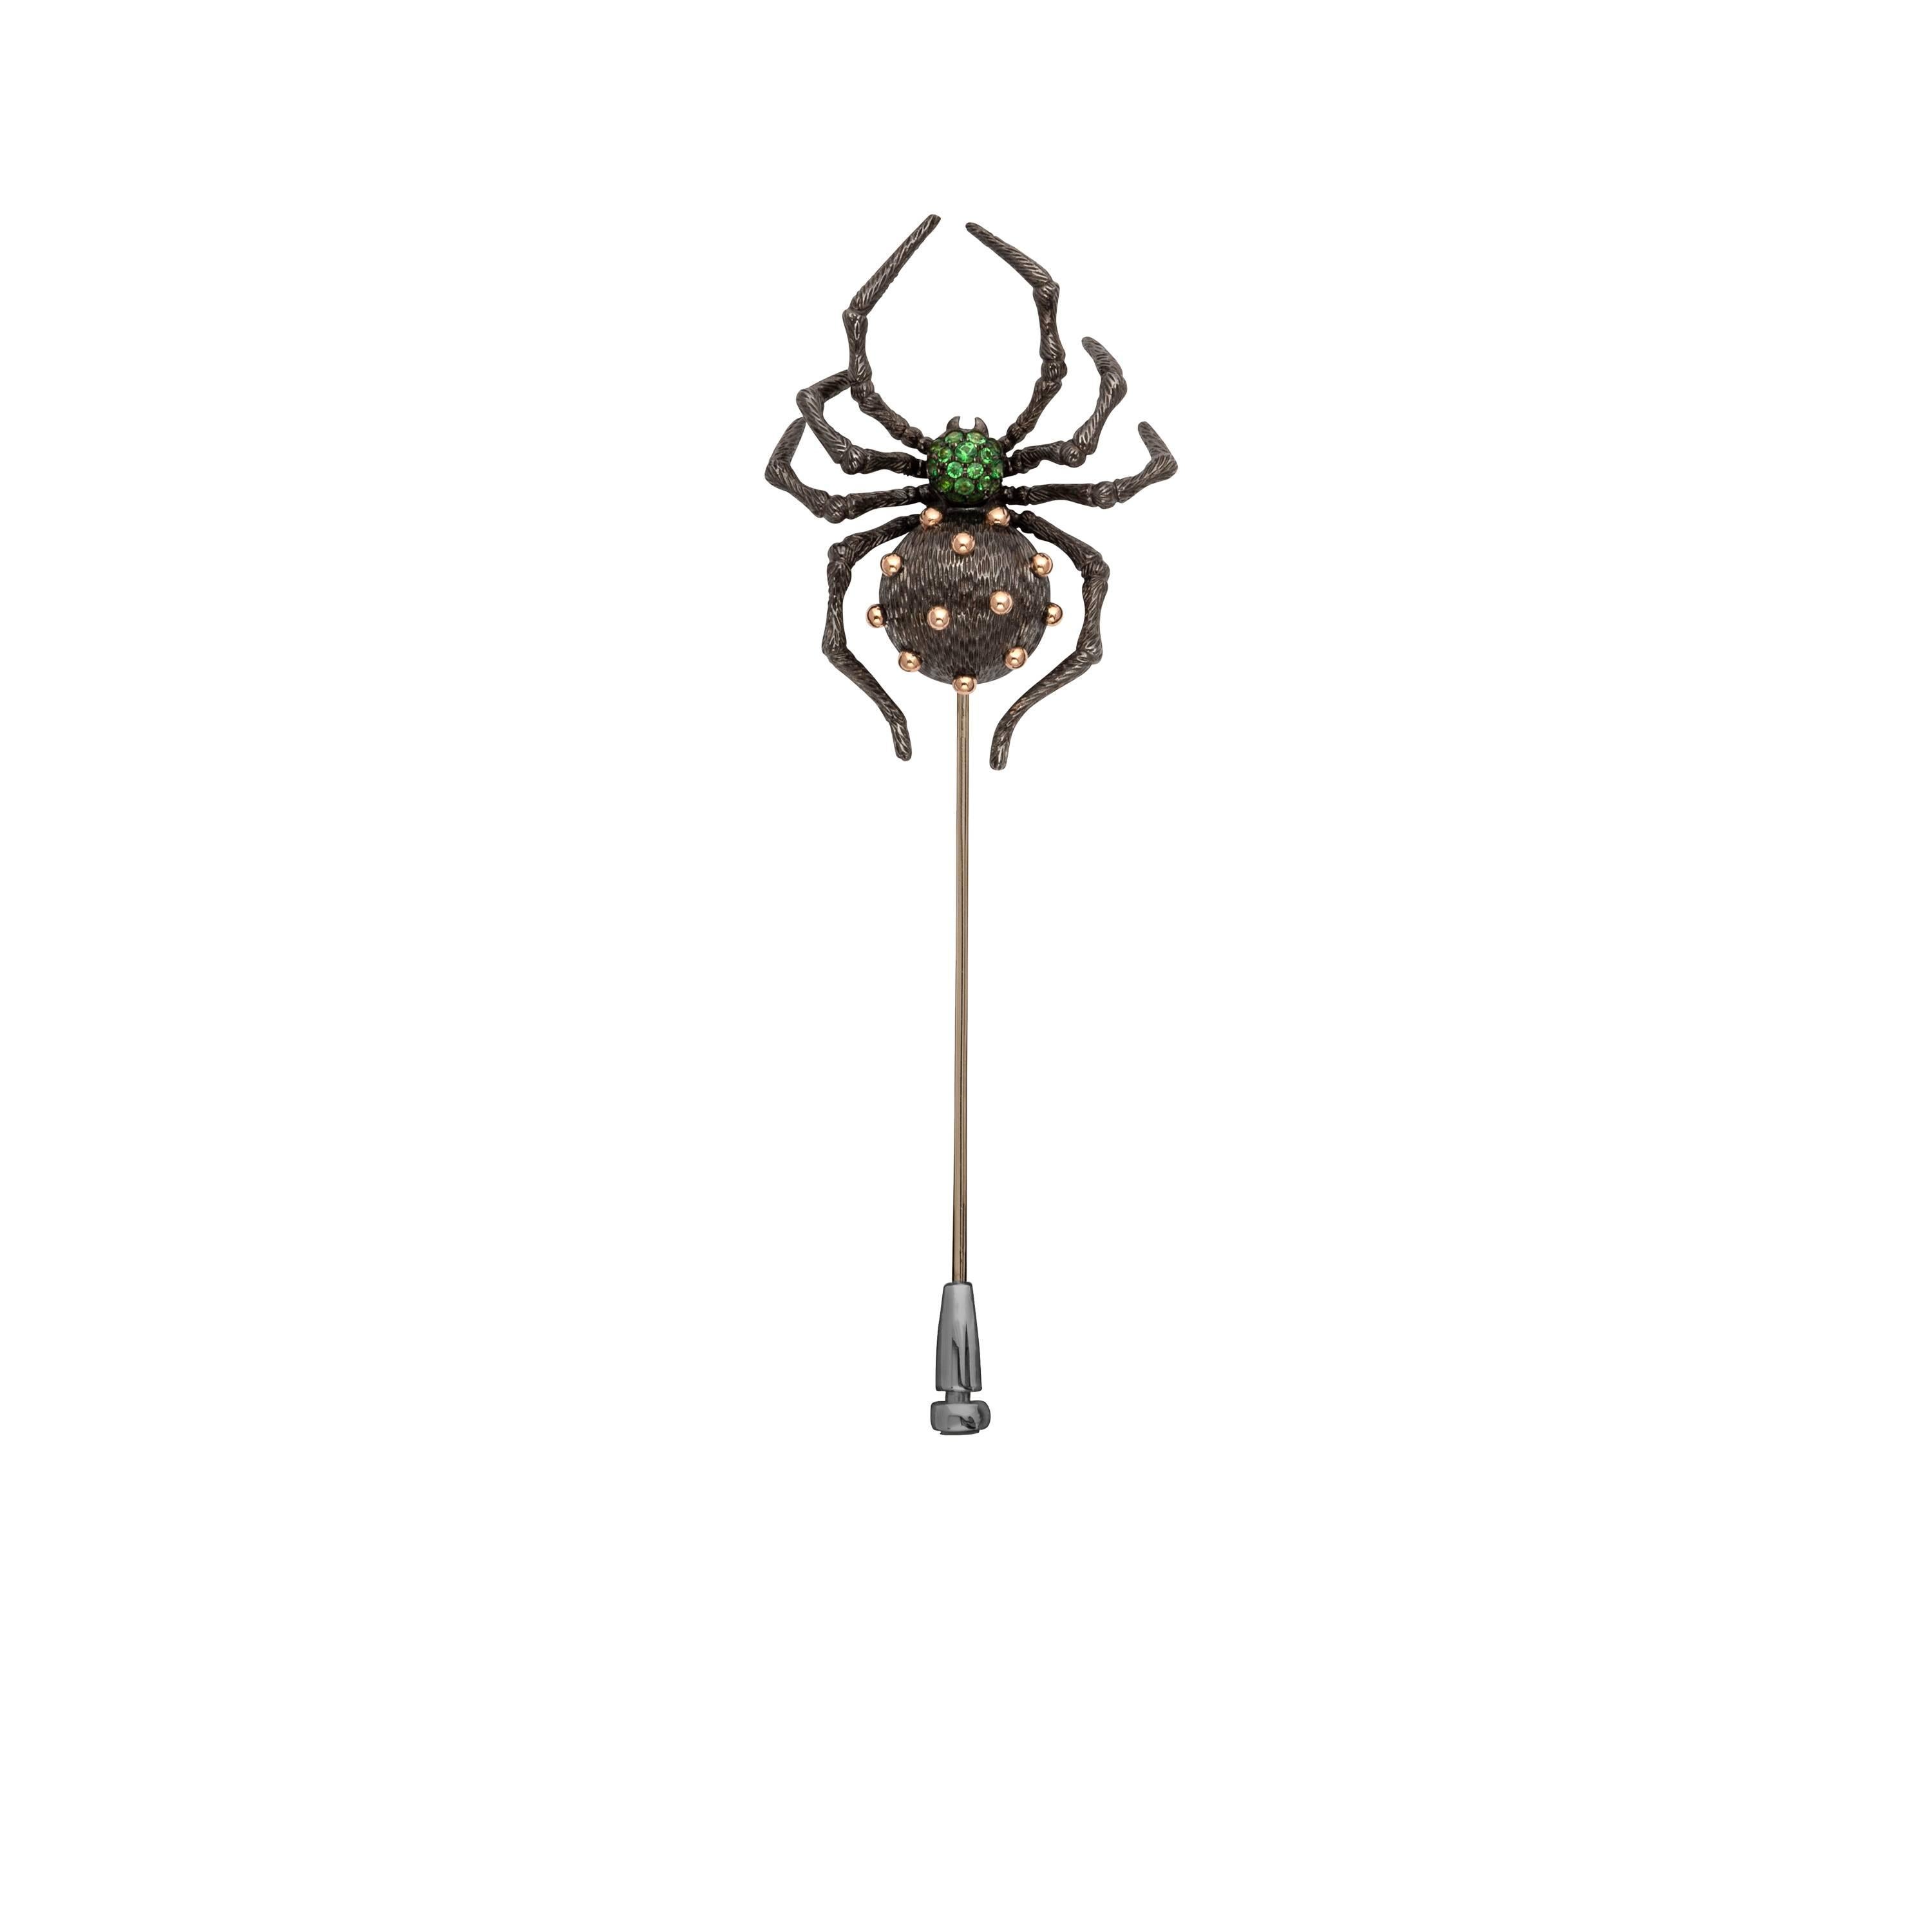 The Spider Yellow and Black Gold Pin is an artful representation of stunning creatures often found in fairytales and fables, letting you complete your look with an 18k solid gold spider. Sitting firmly on a black gold needle with yellow gold clutch